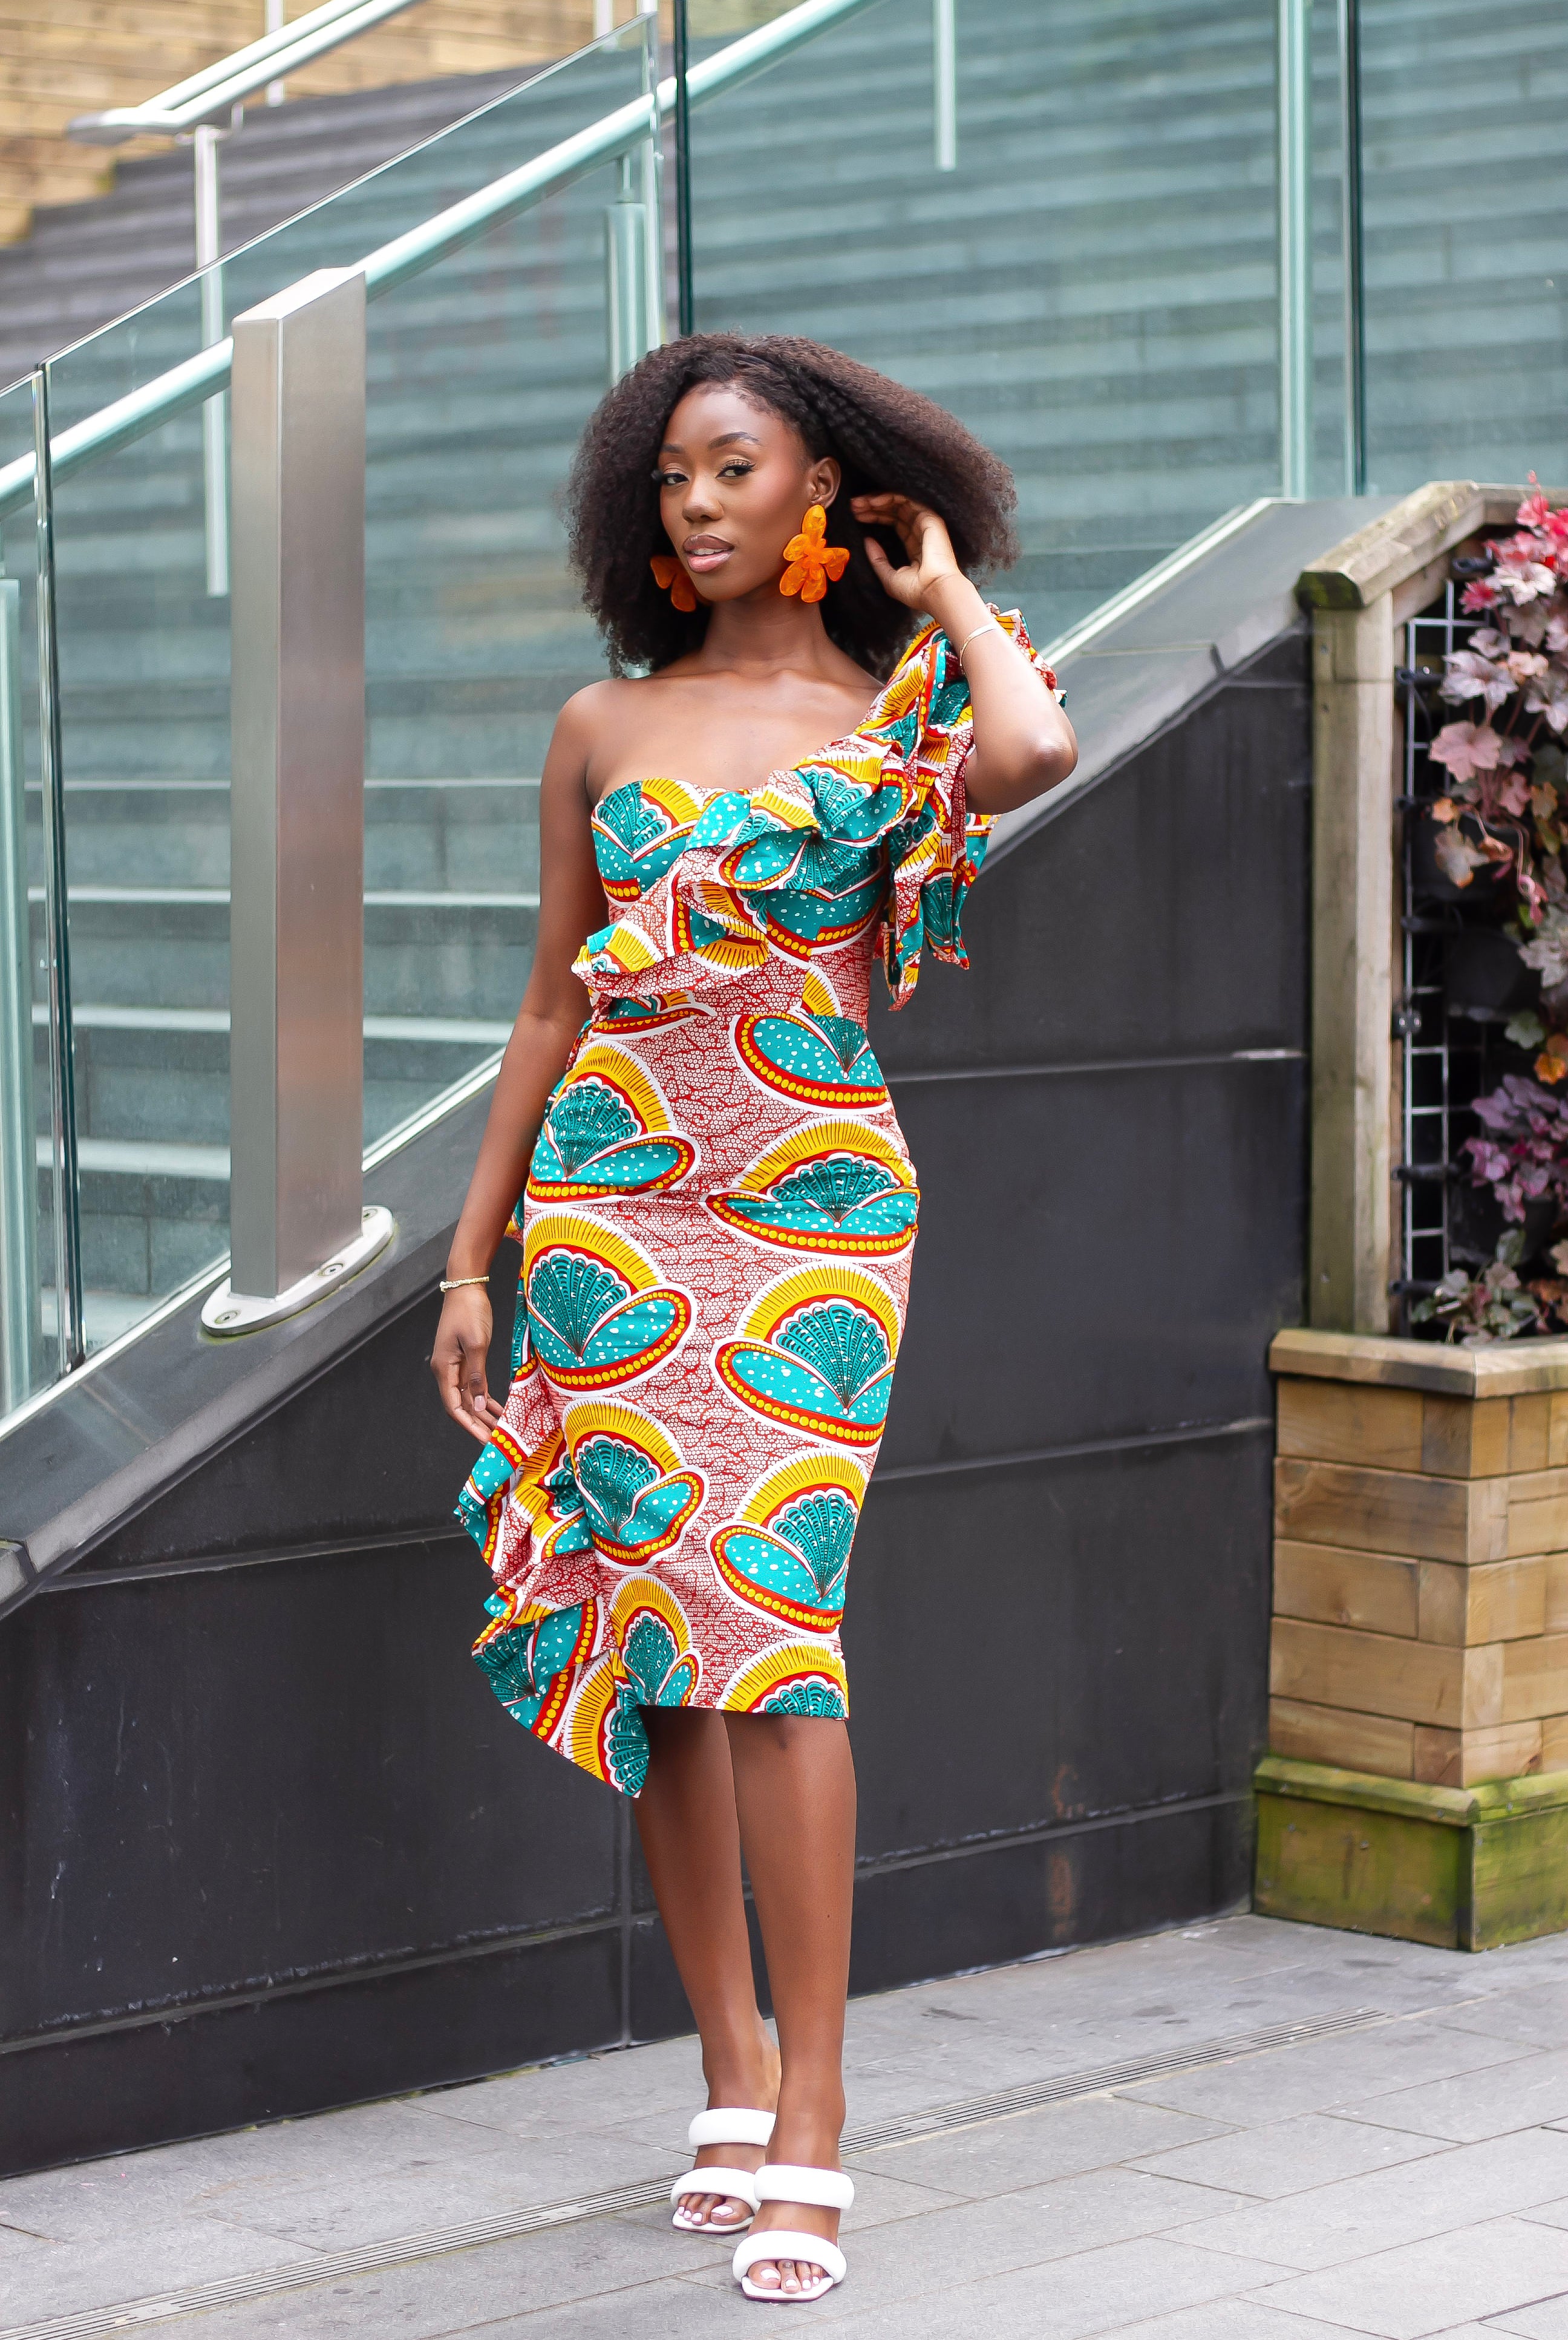 African print fitted dress | African wedding guest dress | Perfect African wedding outfit| African Party dress | African print summer dresses | Bodycon African print dress | Ankara dresses for African social event | African Print Maxi Dresses | Ghana African dress | Kente Dress | African dress | African print Dress | African Clothing Online Shop | Short African dress | African dress UK | african women's clothing | african outfit | Trendy African Dress | African dress UK| monostrap Ankara wedding dress